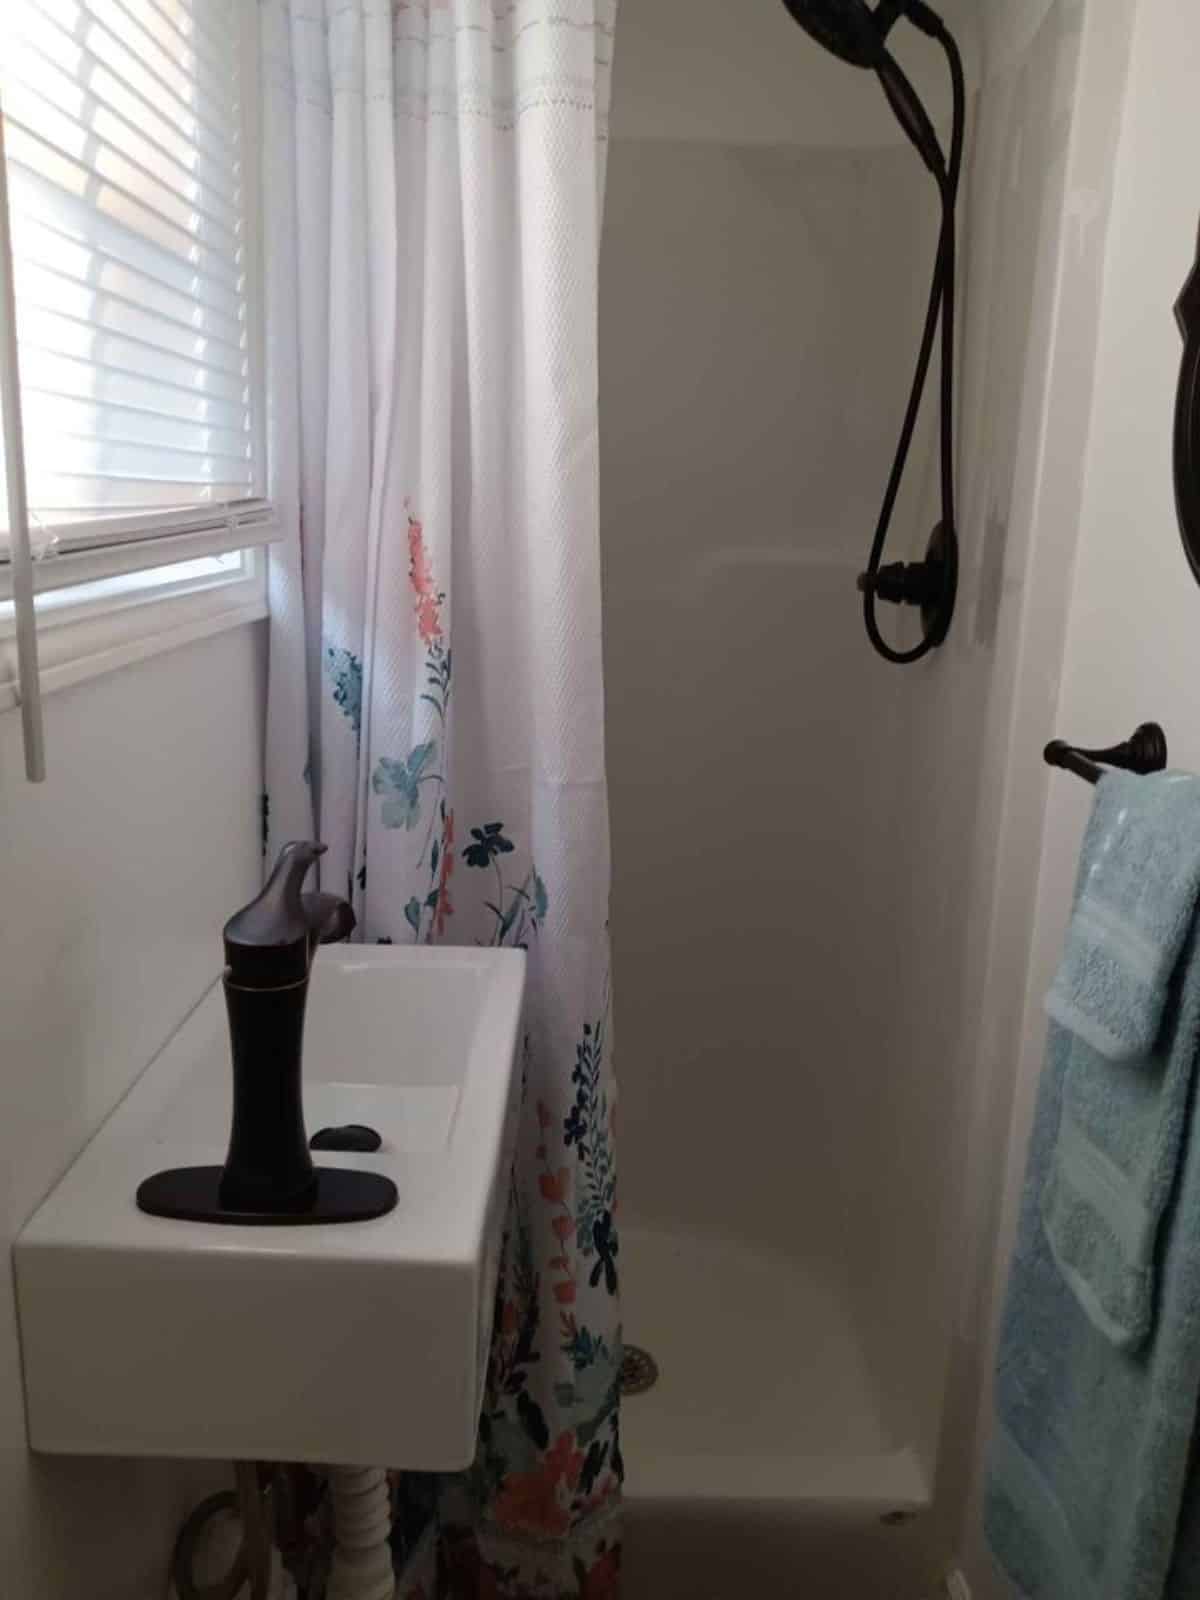 bathroom of turnkey ready tiny home has all the standard fittings and full length shower area